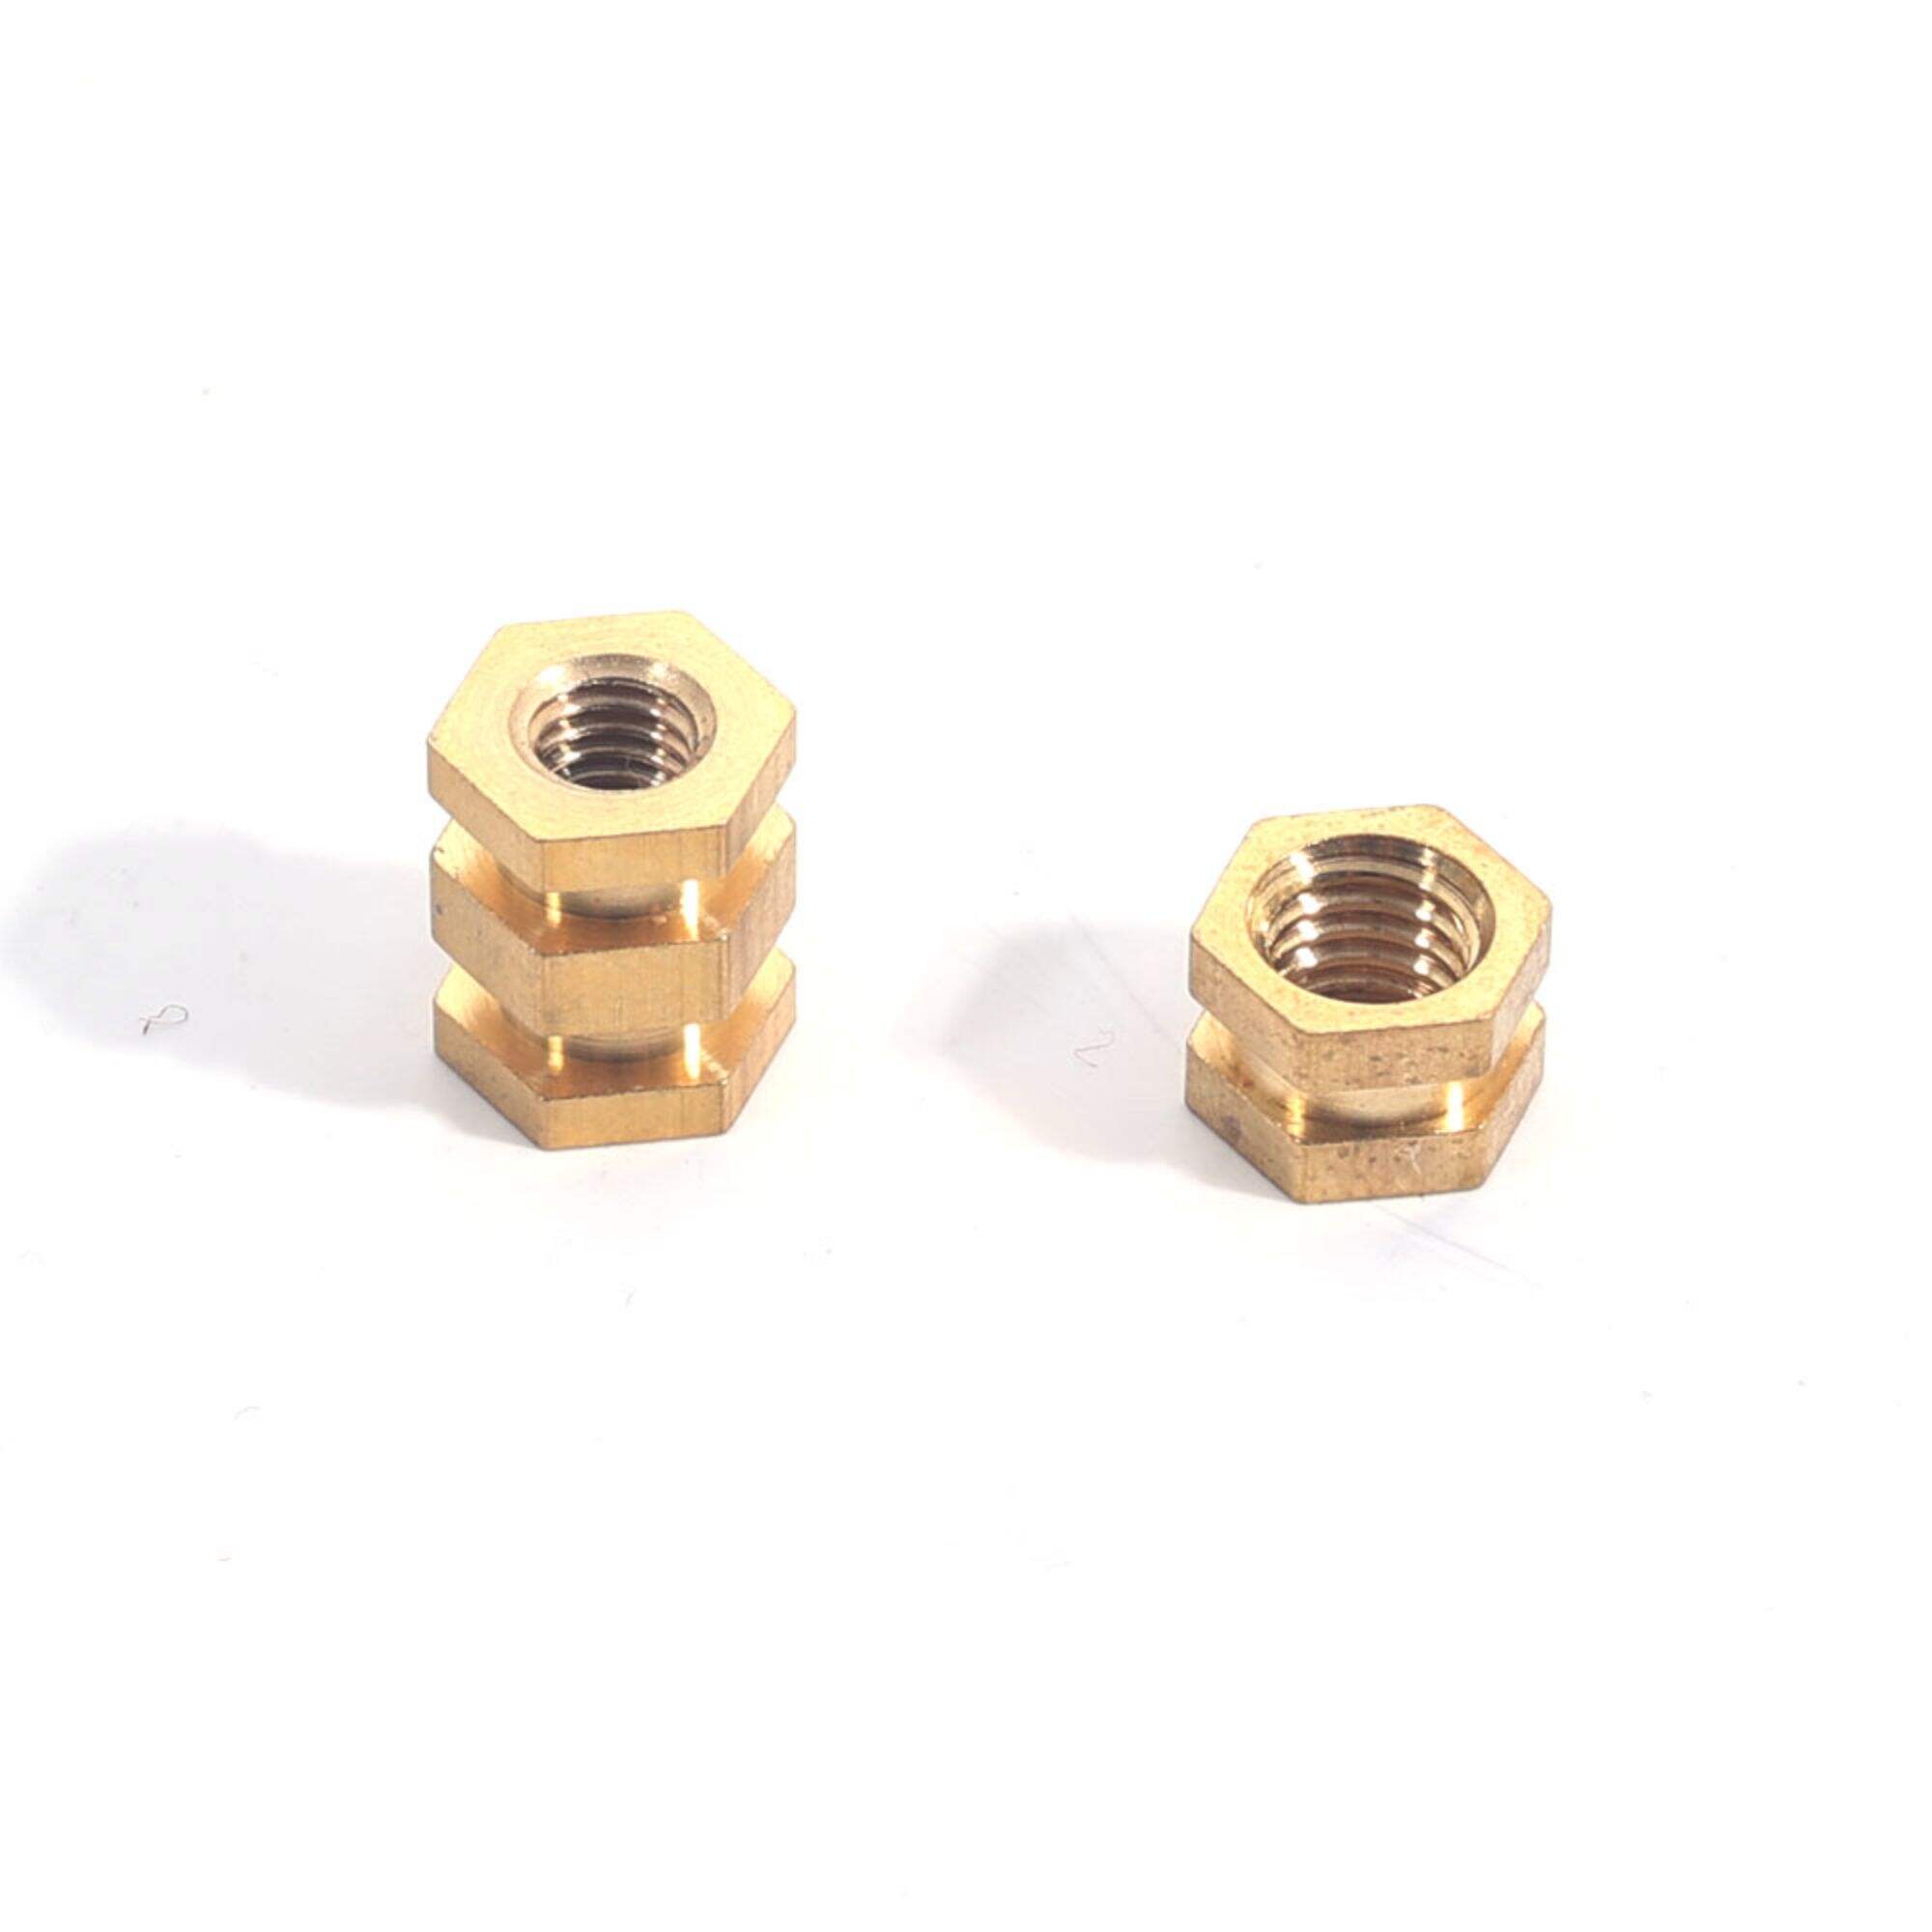 Copper Nut Manufacturer M3 M4 M5 M6   Exhaust Hydrofoil Brass Insert Copper Nuts And Bolts